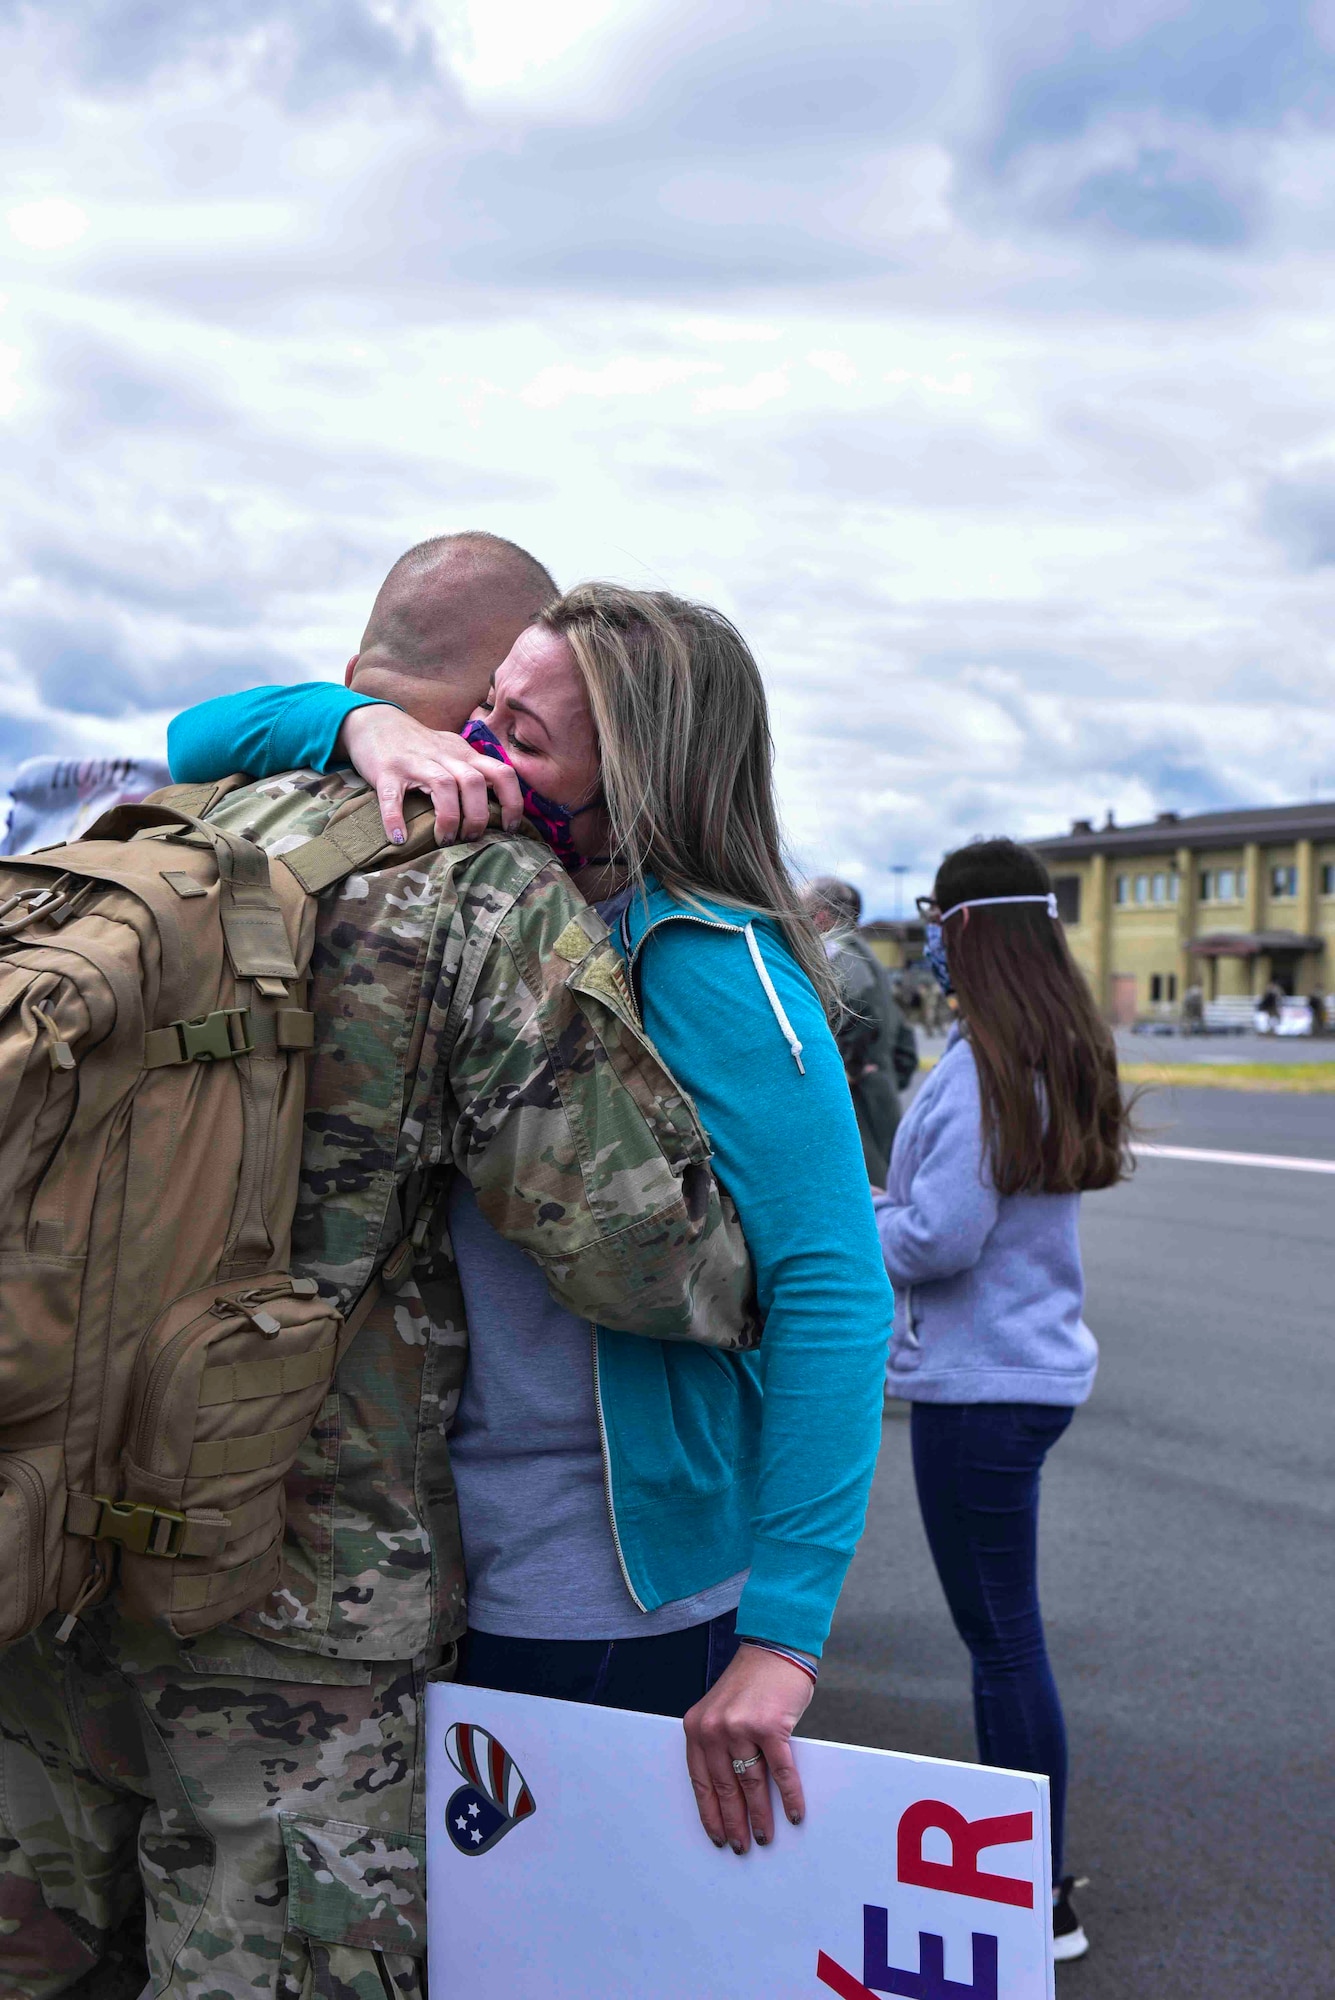 A 93rd Air Refueling Squadron member arrives home from a deployment and is greeted by a loved one on Fairchild Air Force Base, Washington, July 1, 2020. The Airmen left home for a four-month deployment but due to coronavirus disease 2019 health and safety restrictions, members returned after seven months. (U.S. Air Force photo by Airman 1st Class Kiaundra Miller)